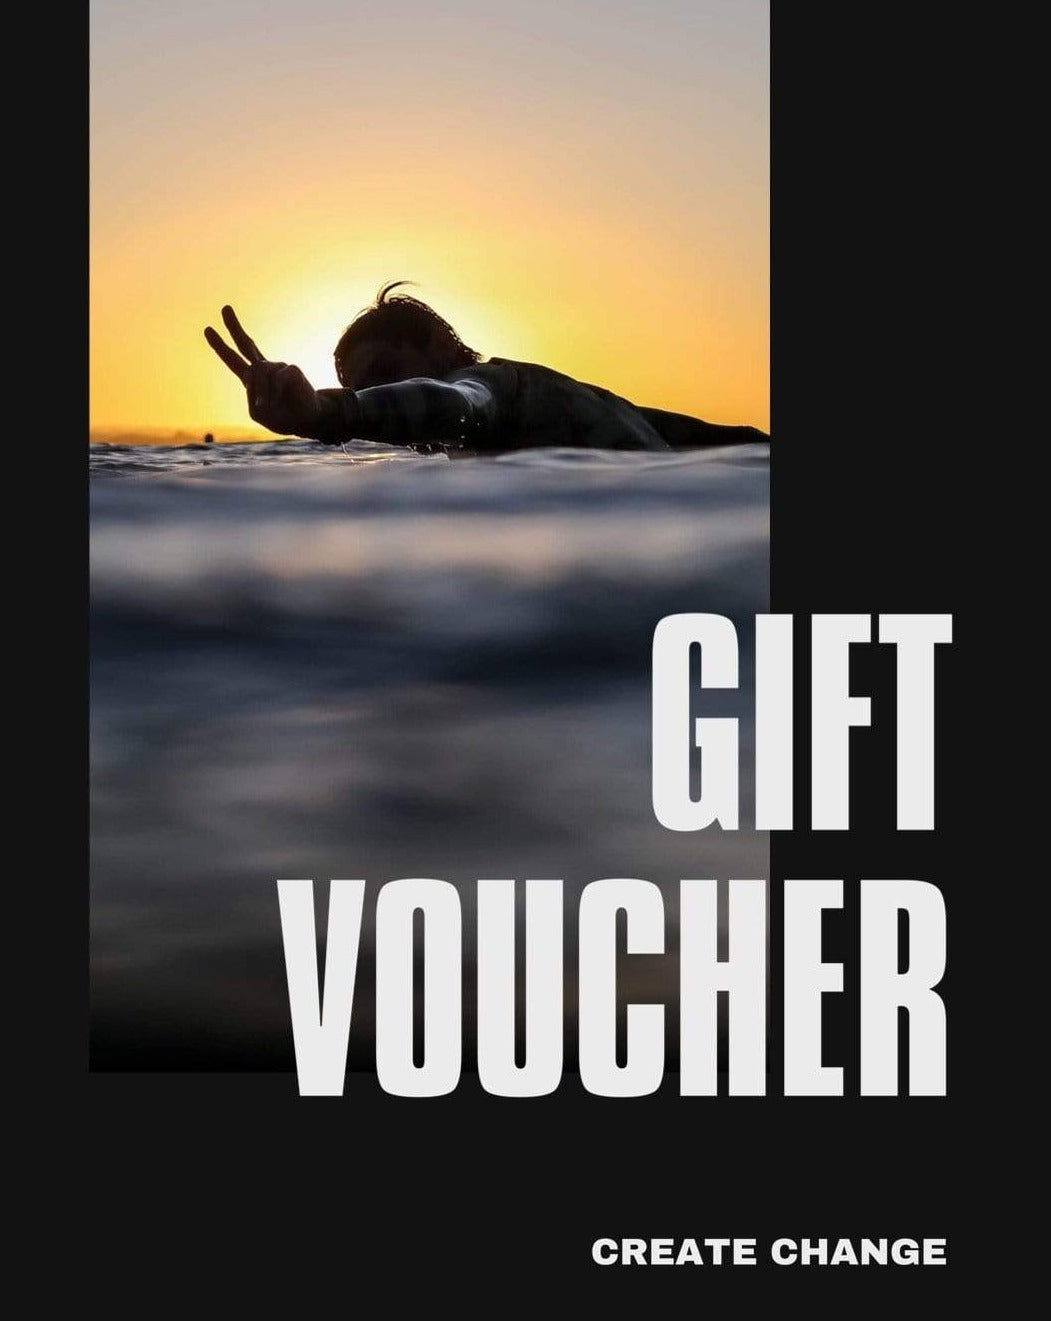 Gift Voucher - panamunaproject Ethical, Organic & Sustainable T-shirts